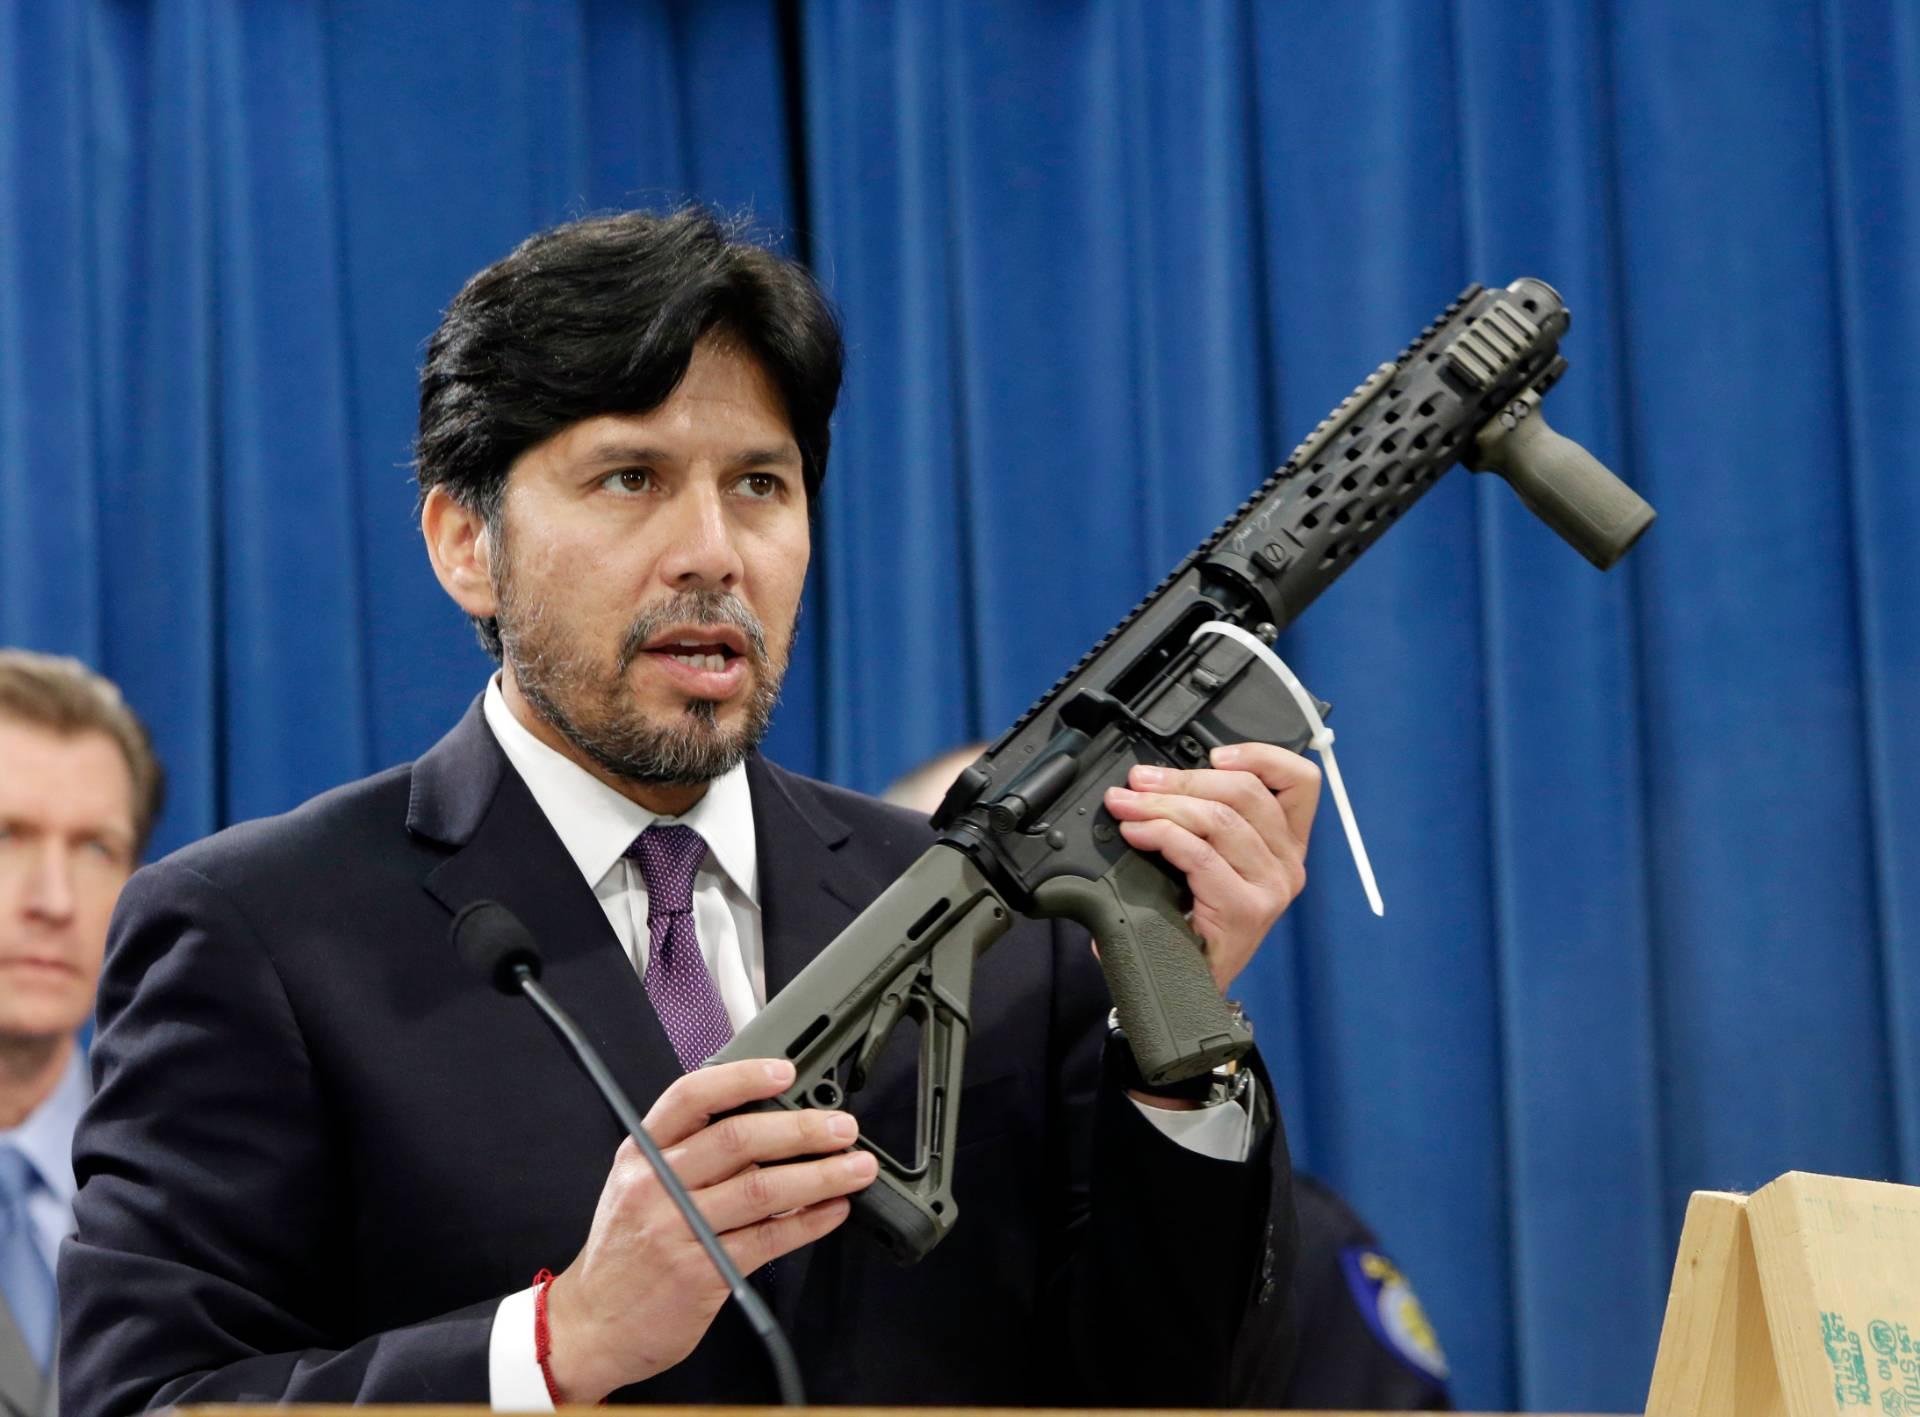 In this Jan. 13, 2014 file photo, former California State Sen. Kevin de Leon, D-Los Angeles, displays a homemade fully automatic rifle, confiscated by the Department of Justice, at the Capitol in Sacramento, California. (AP Photo / Rich Pedroncelli, File)